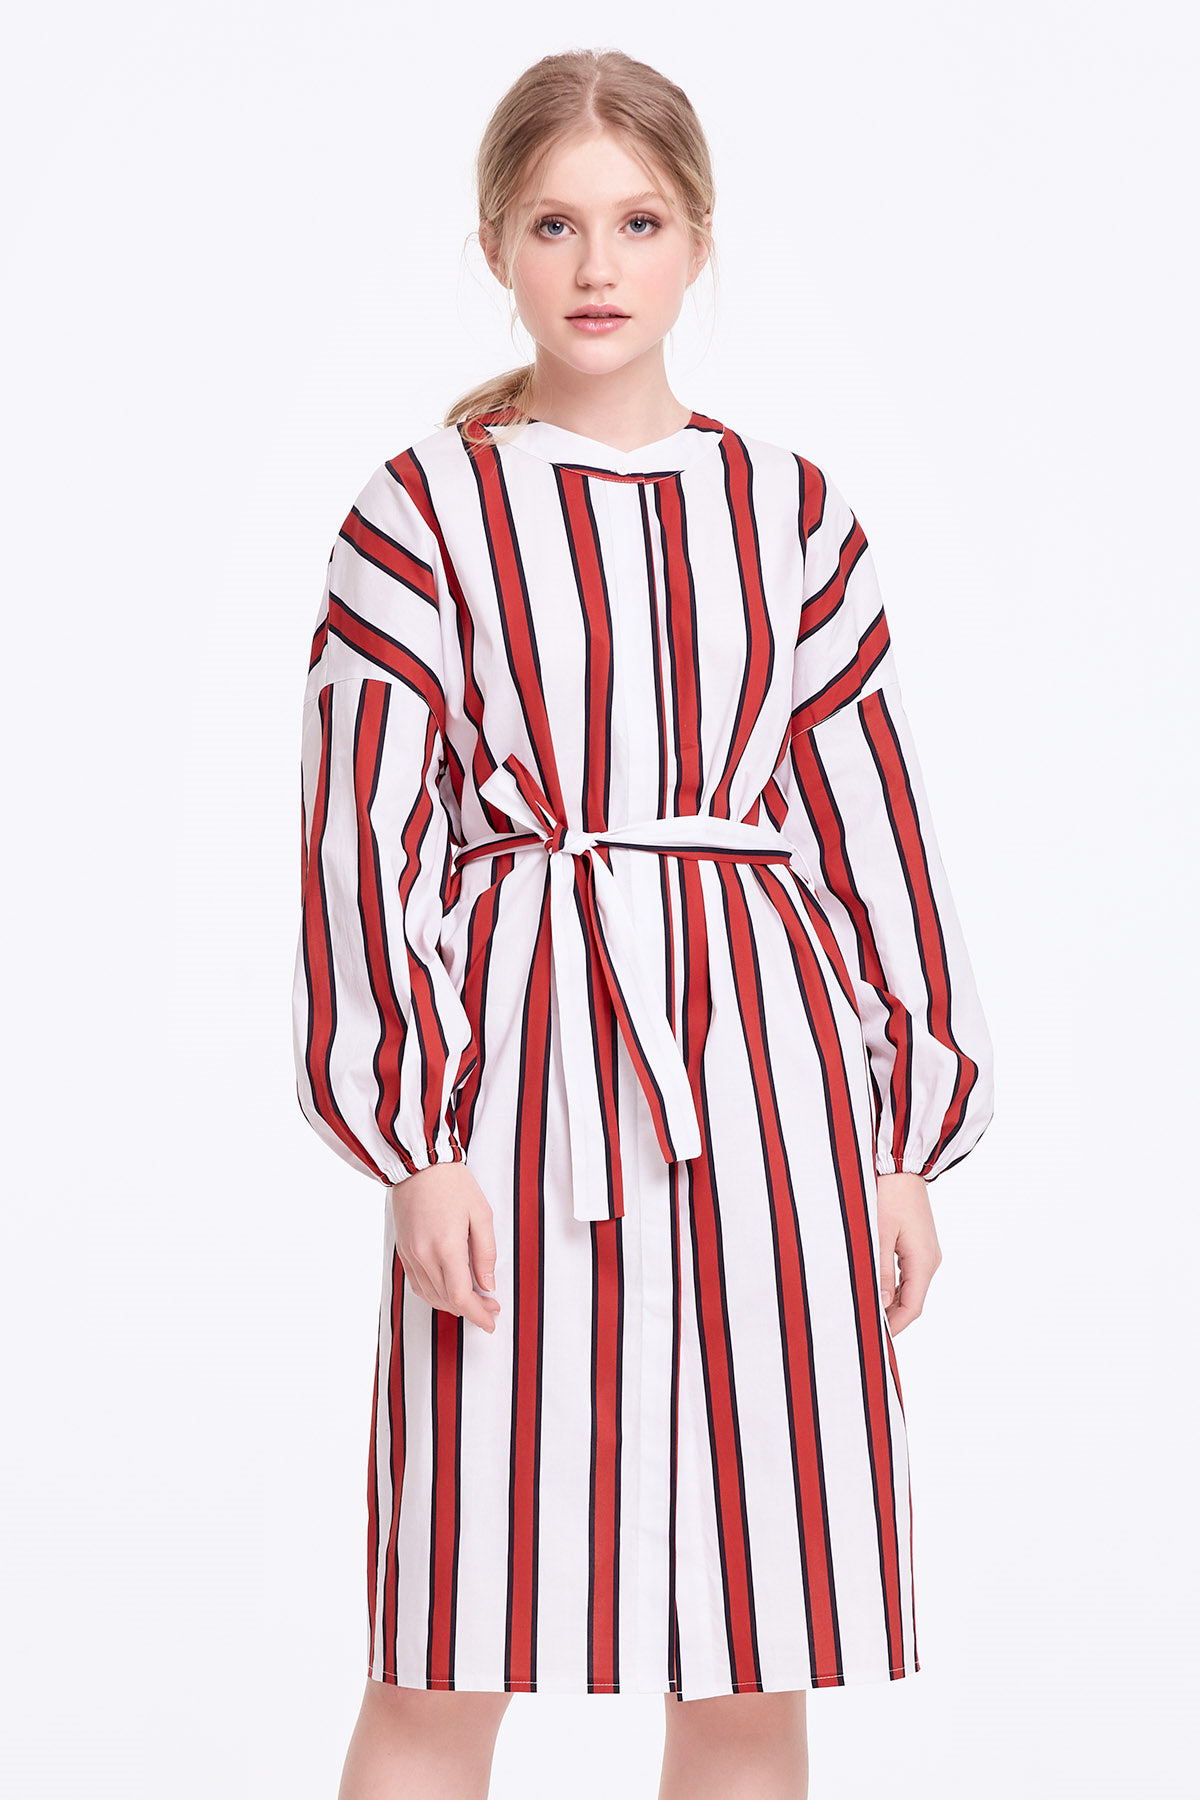 White dress with red and black stripes, photo 1